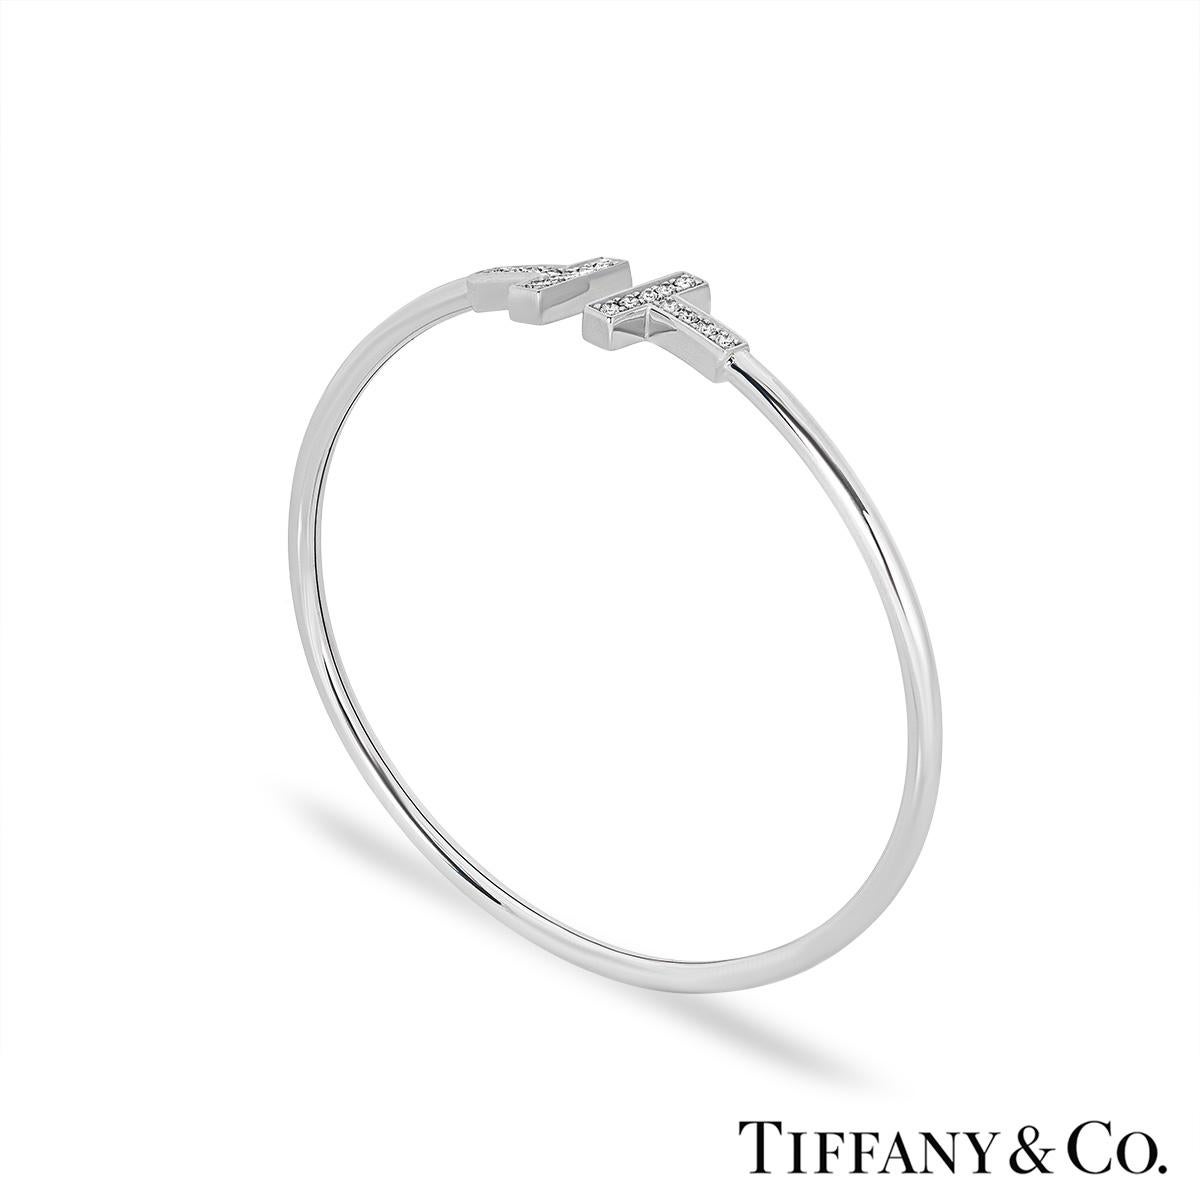 A timeless 18k white gold diamond bracelet by Tiffany & Co. from the Tiffany T collection. The bracelet comprises of two iconic Tiffany T motifs in a cuff style, pave set with 18 round brilliant cut diamonds with an approximate weight of 0.24ct, F-G